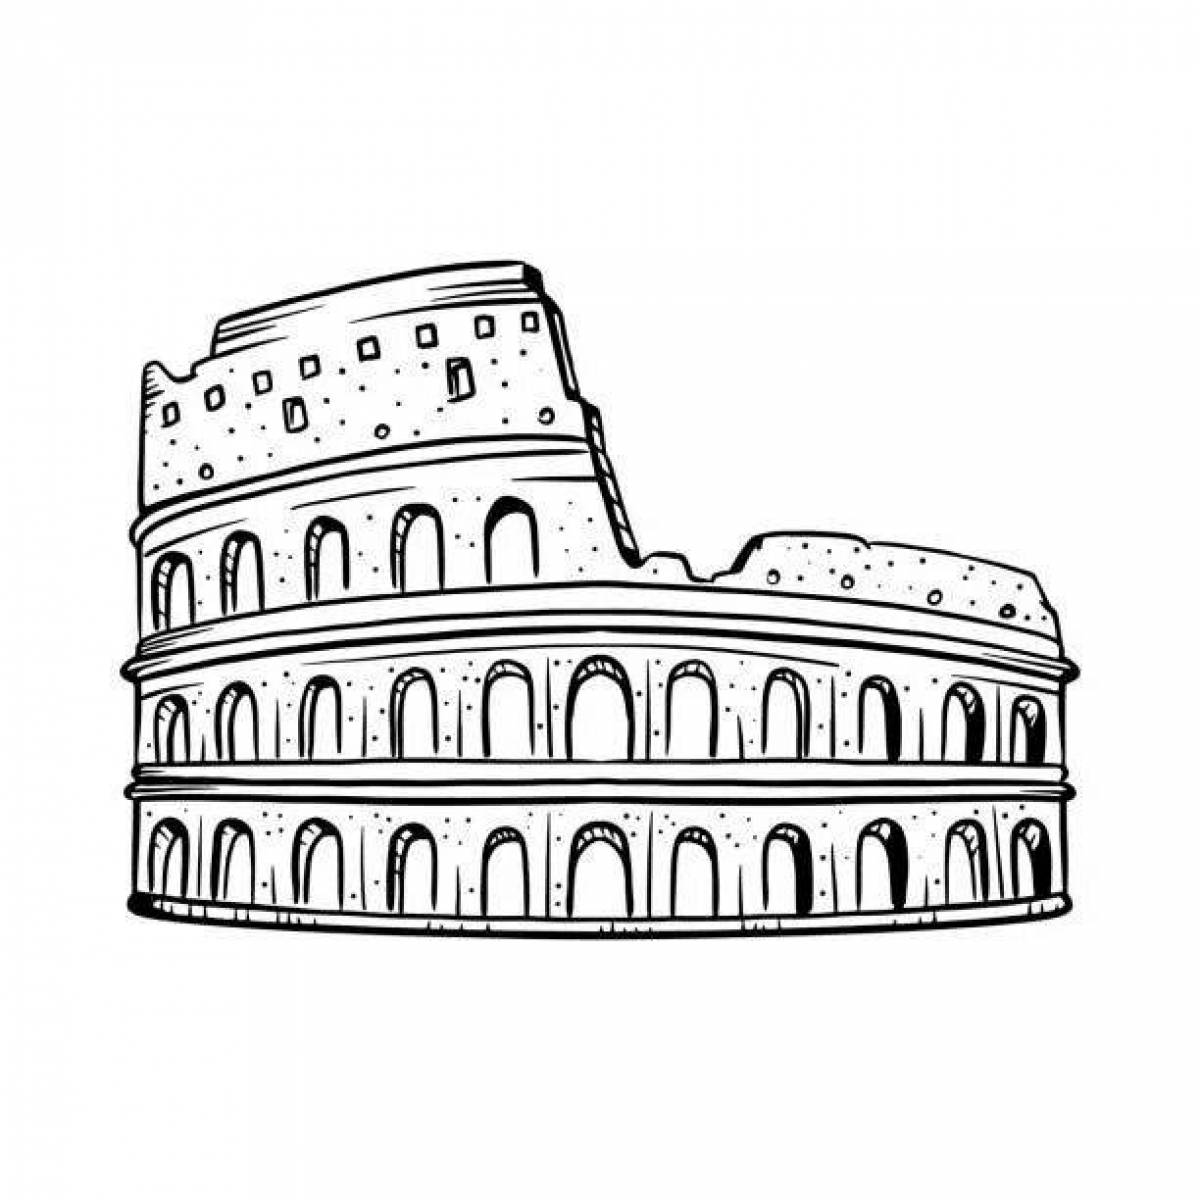 Coloring page shining colosseum